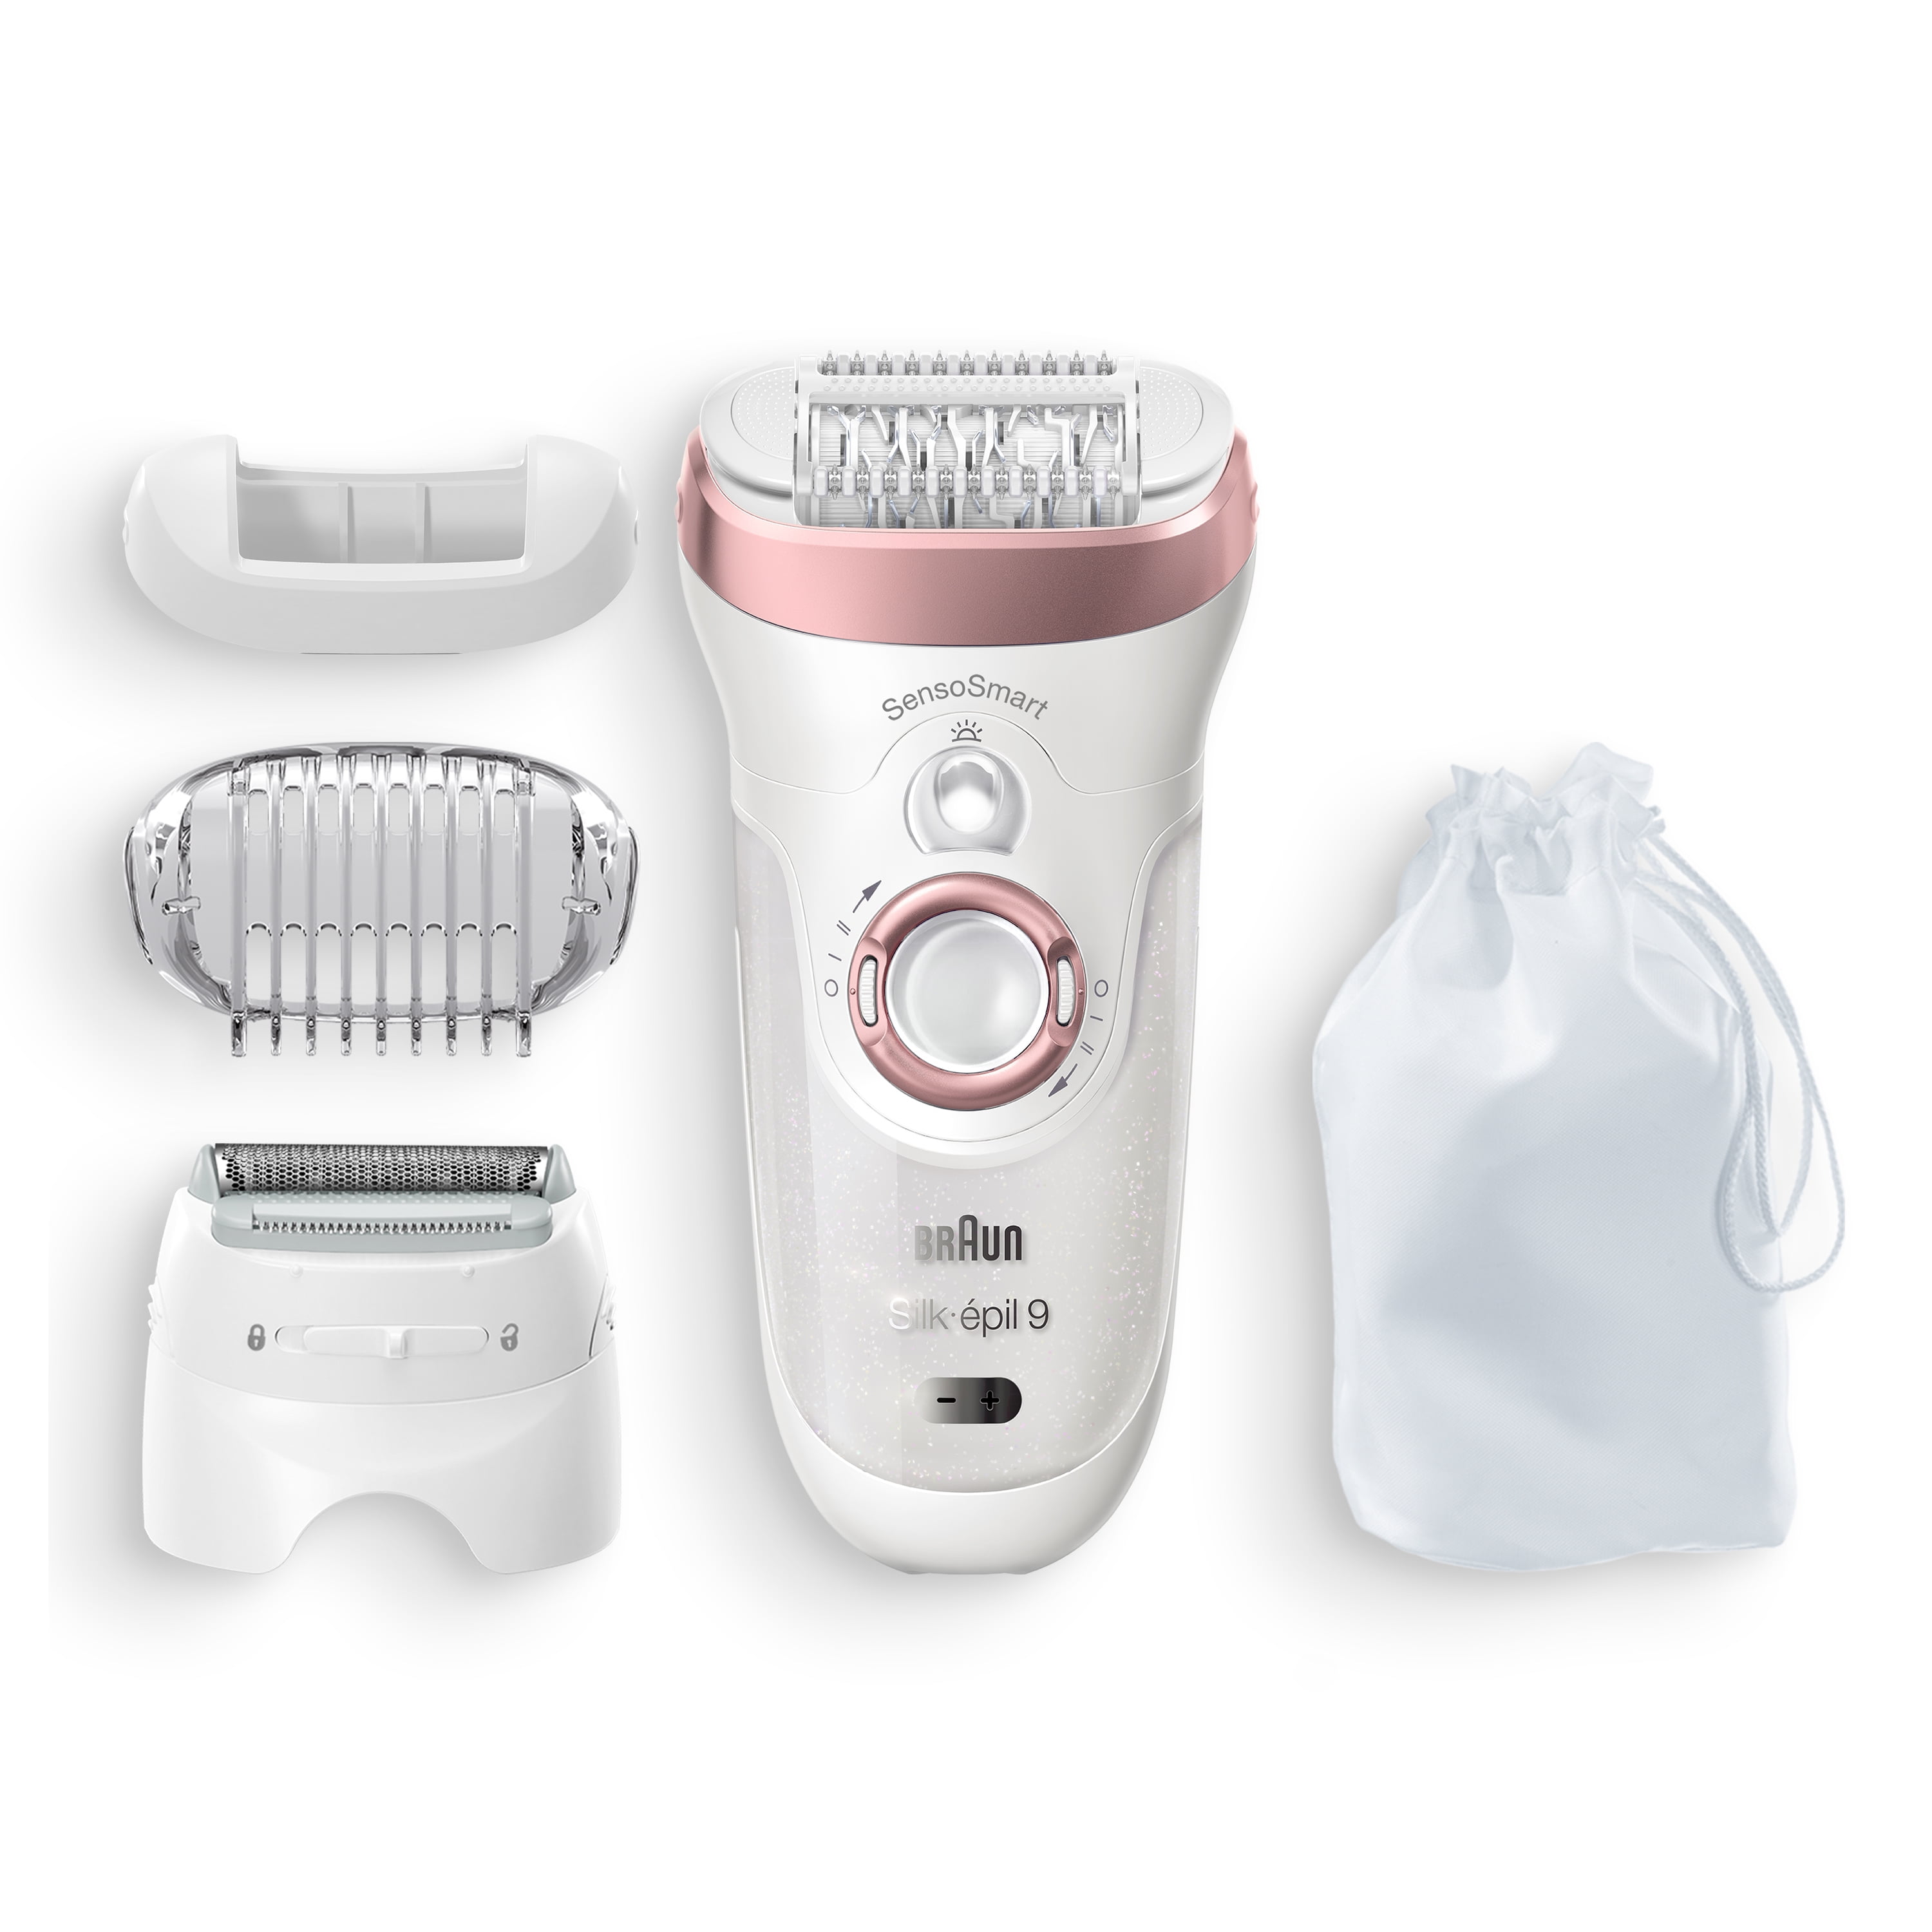 Braun Epilator Silk-epil 9-720, Body Hair Removal for Women, Wet and Dry,  Women's Shaver and Trimmer & Braun Face Epilator Facespa Pro 910, Facial